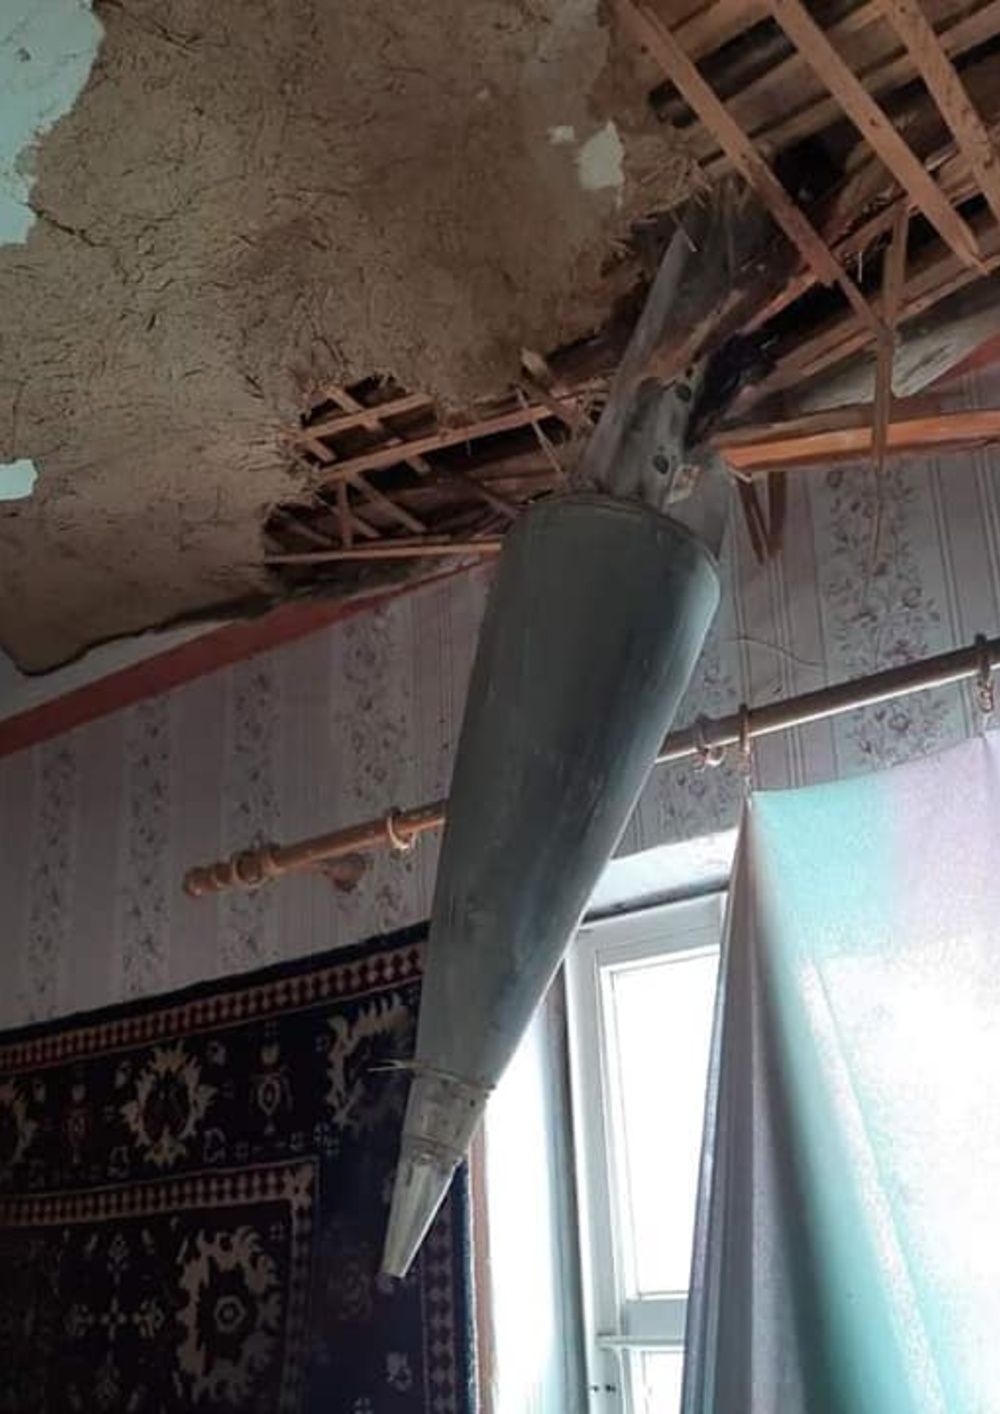 Russian Rocket hit private Apartment in Kharkiv